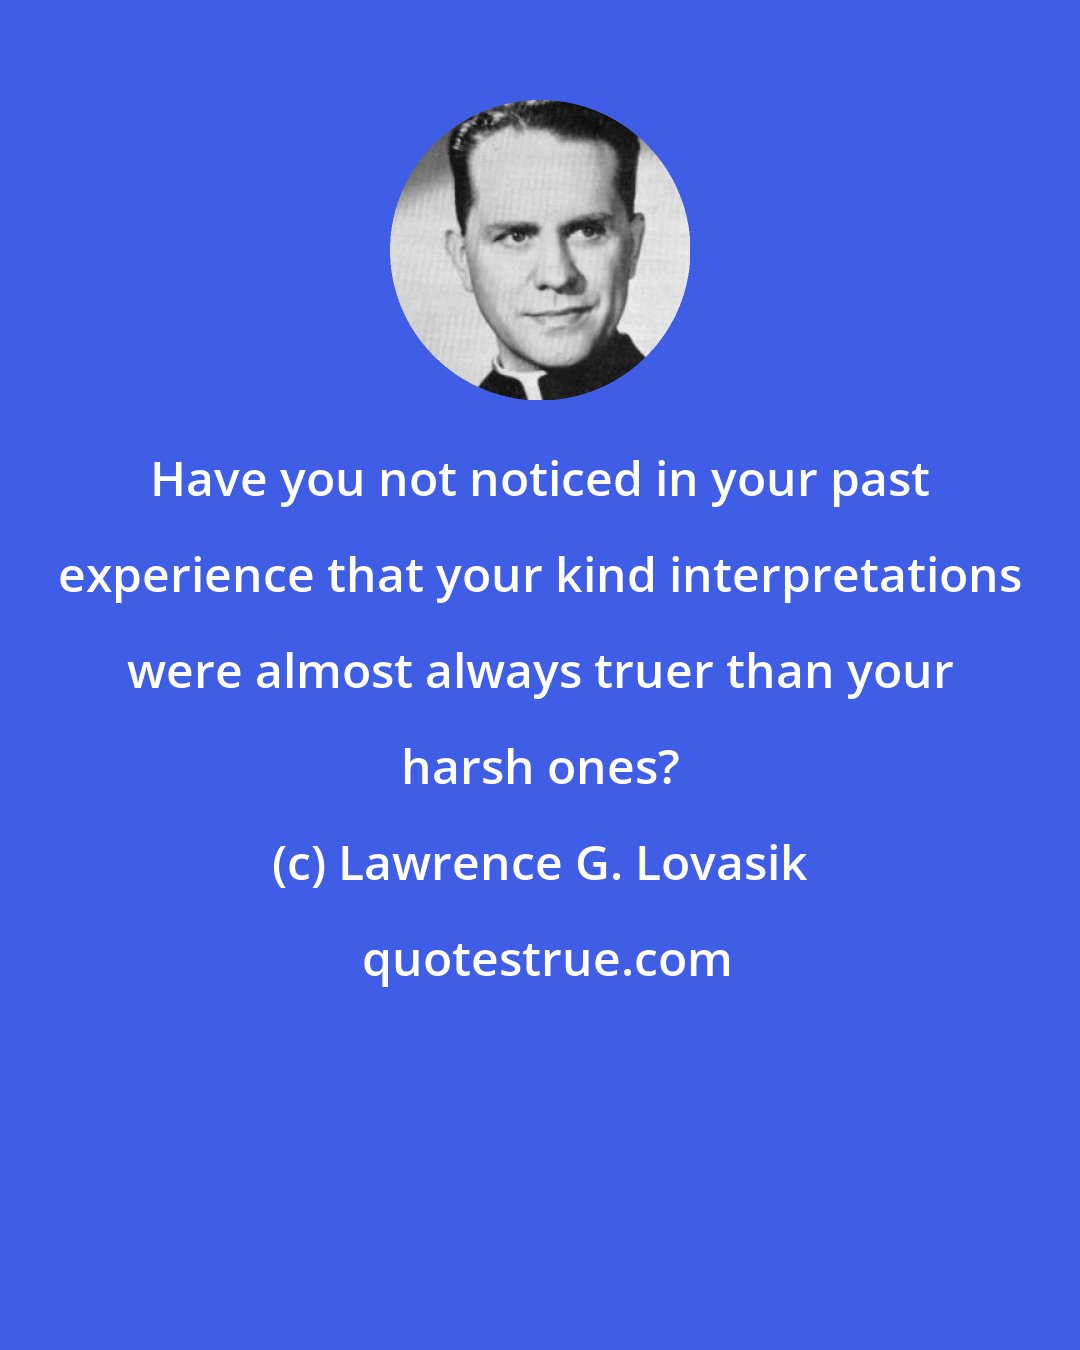 Lawrence G. Lovasik: Have you not noticed in your past experience that your kind interpretations were almost always truer than your harsh ones?